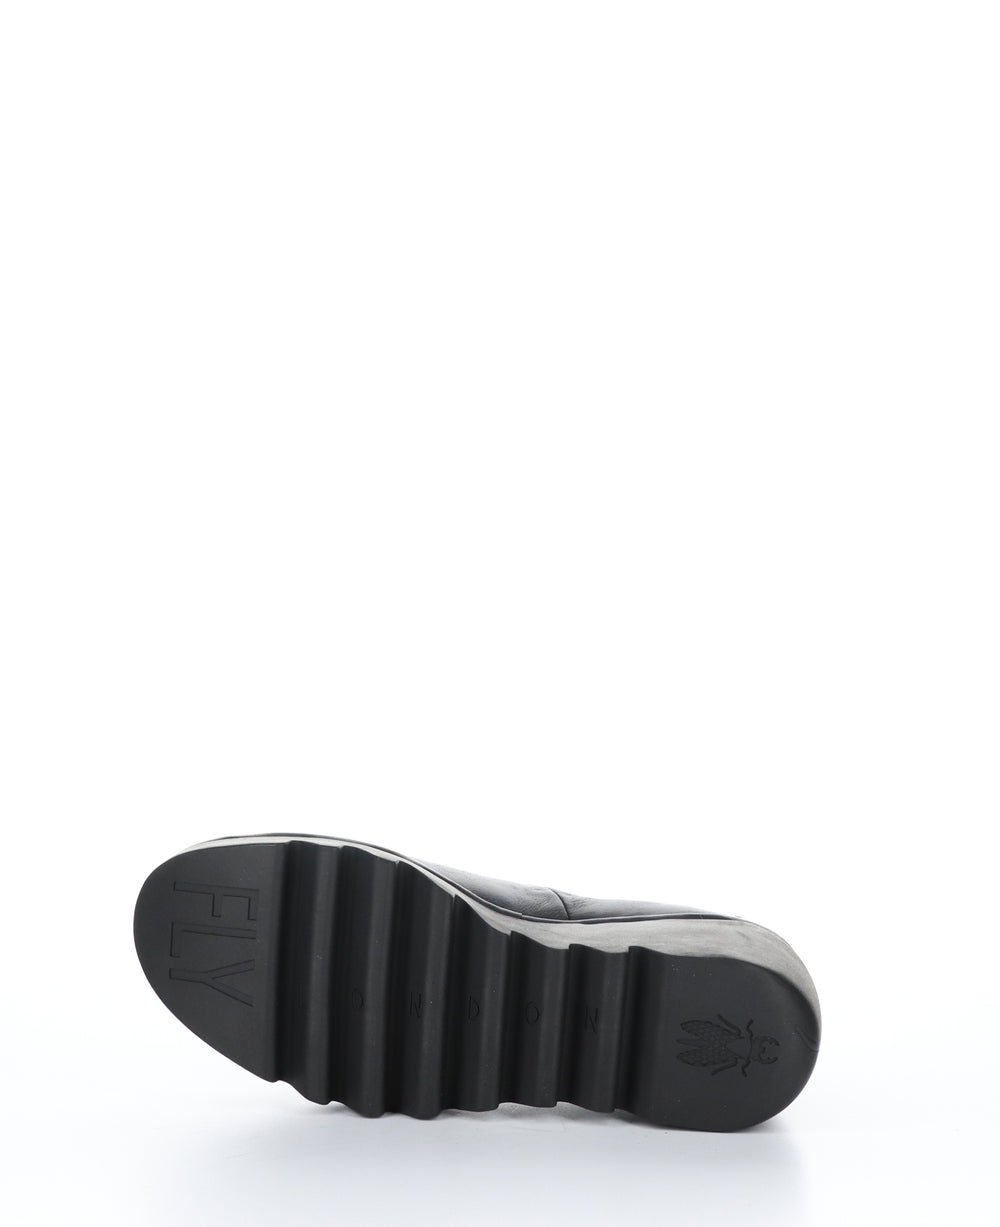 BESO246FLY Verona Black Wedge Shoes